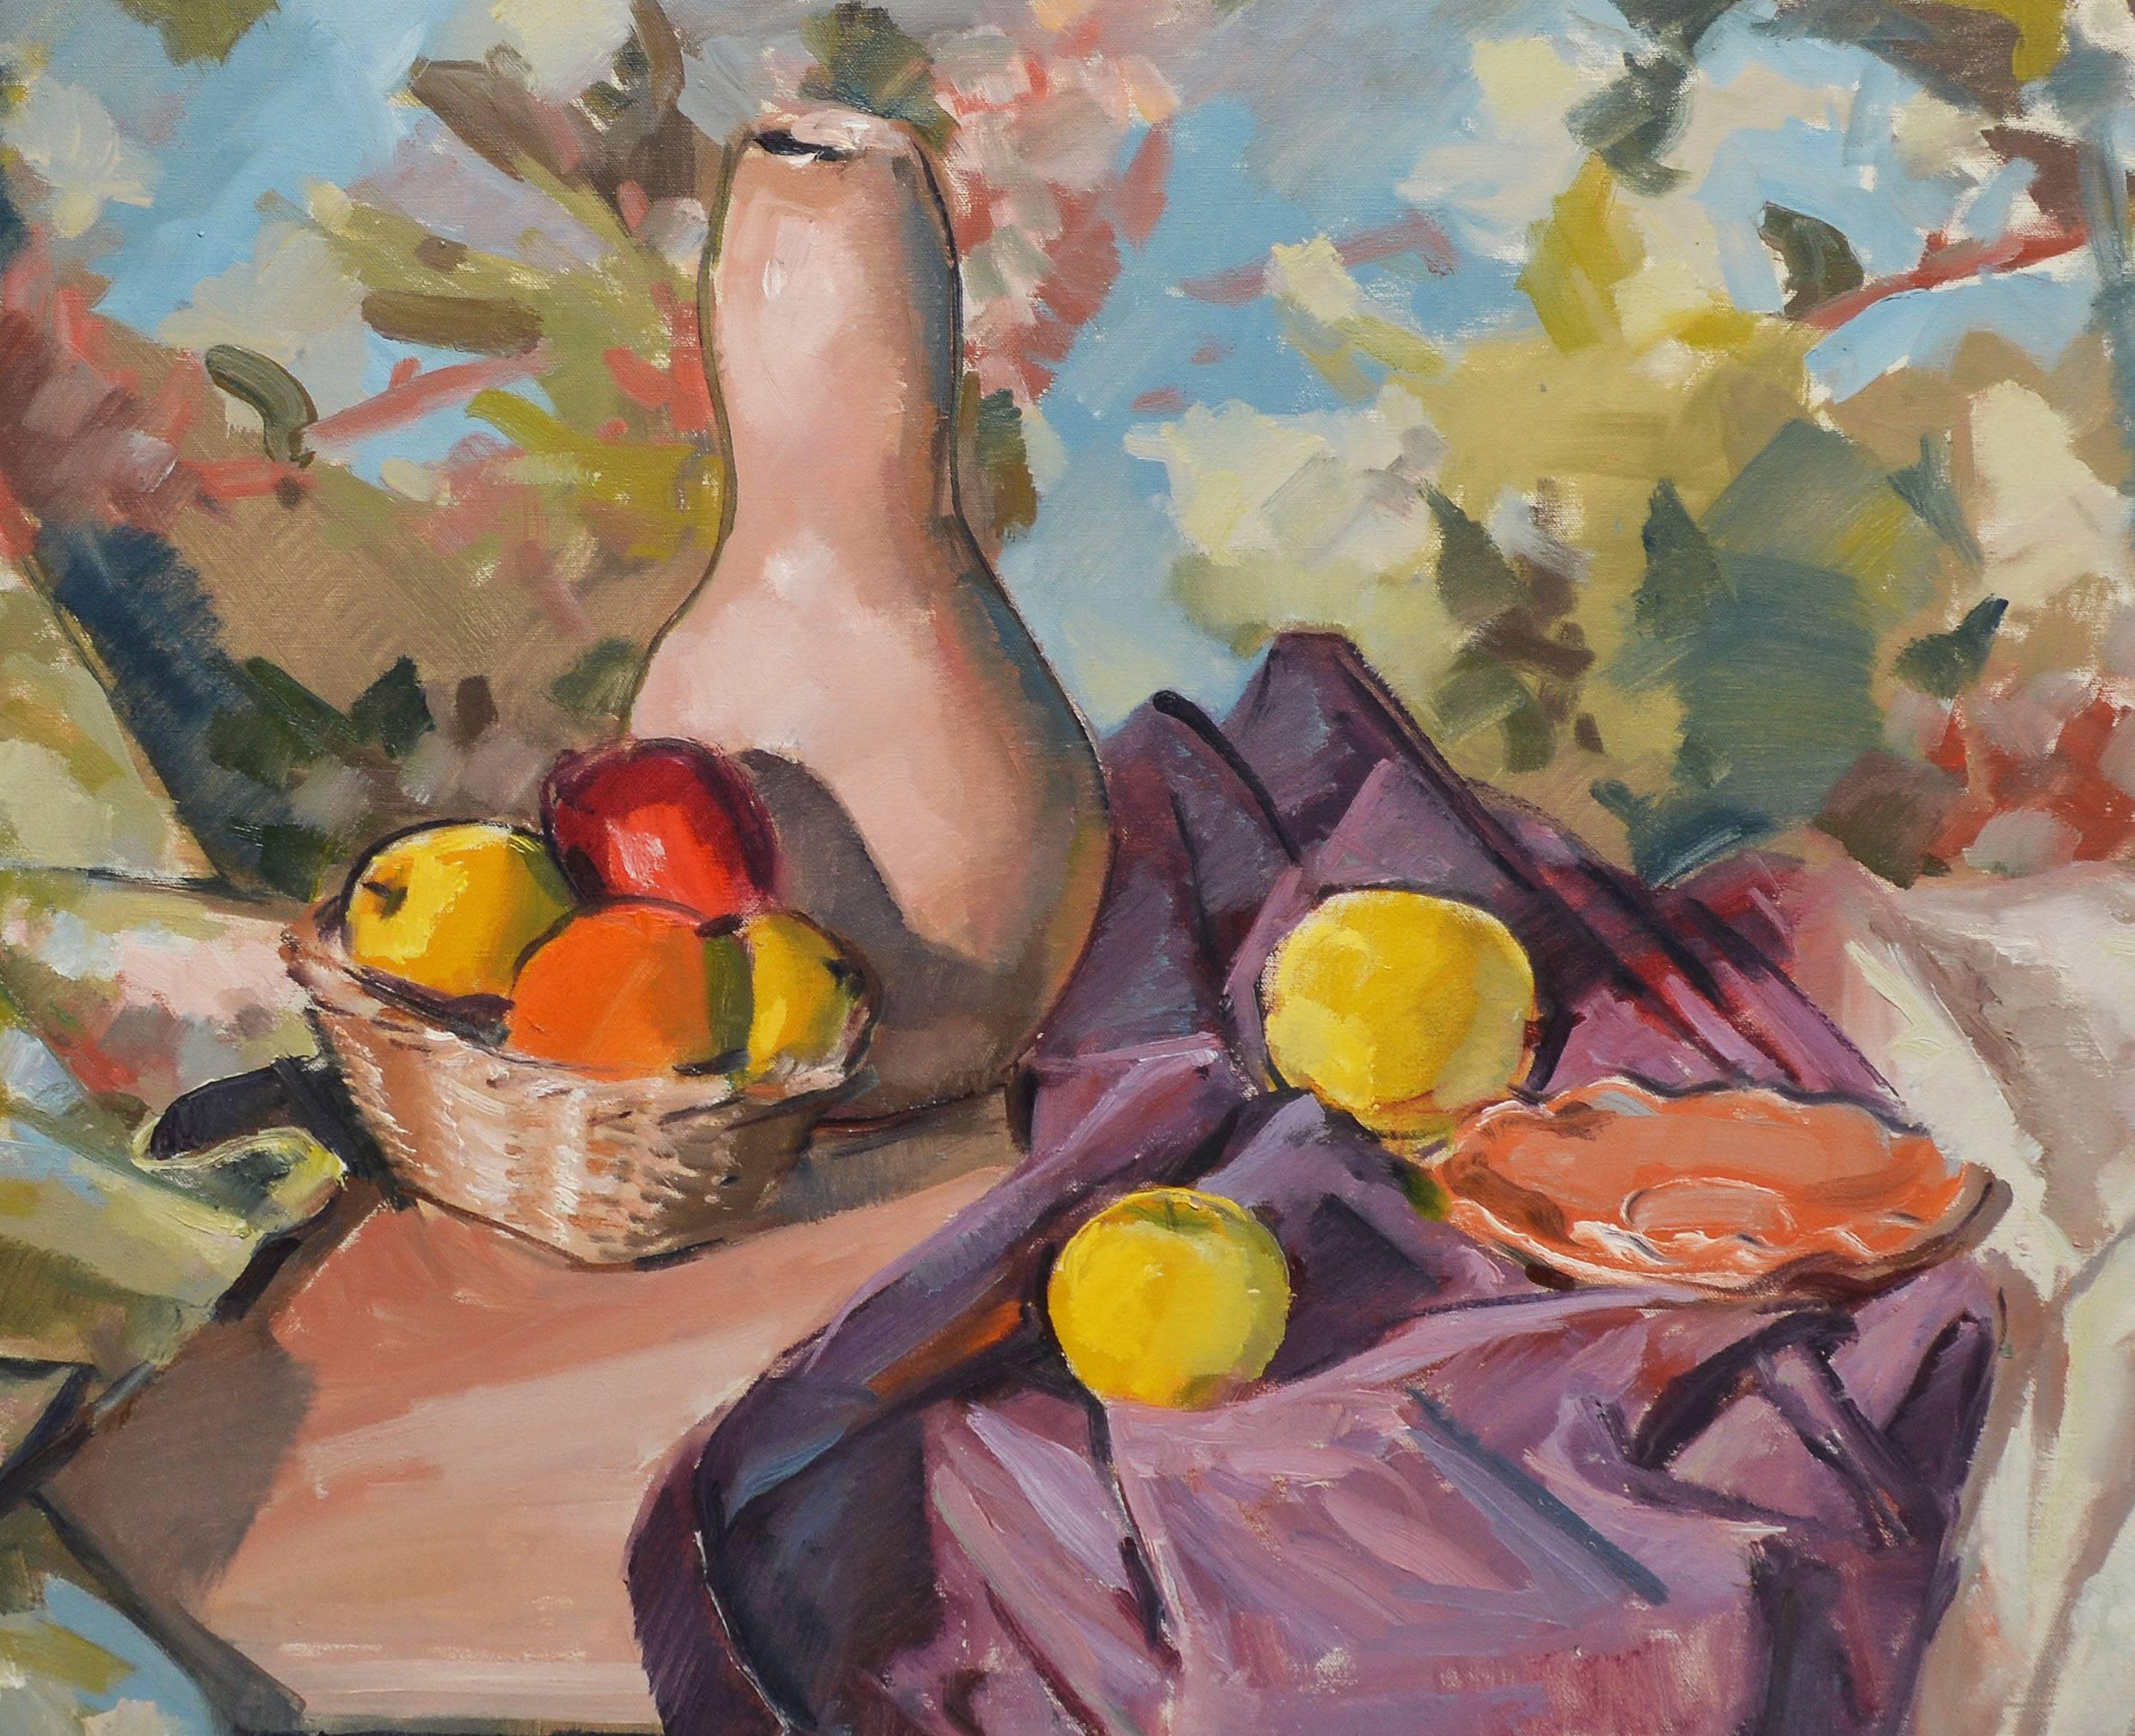 Modernist view of a fruit still life.  Oil on canvas, circa 1950.  Signed lower right in monogram 